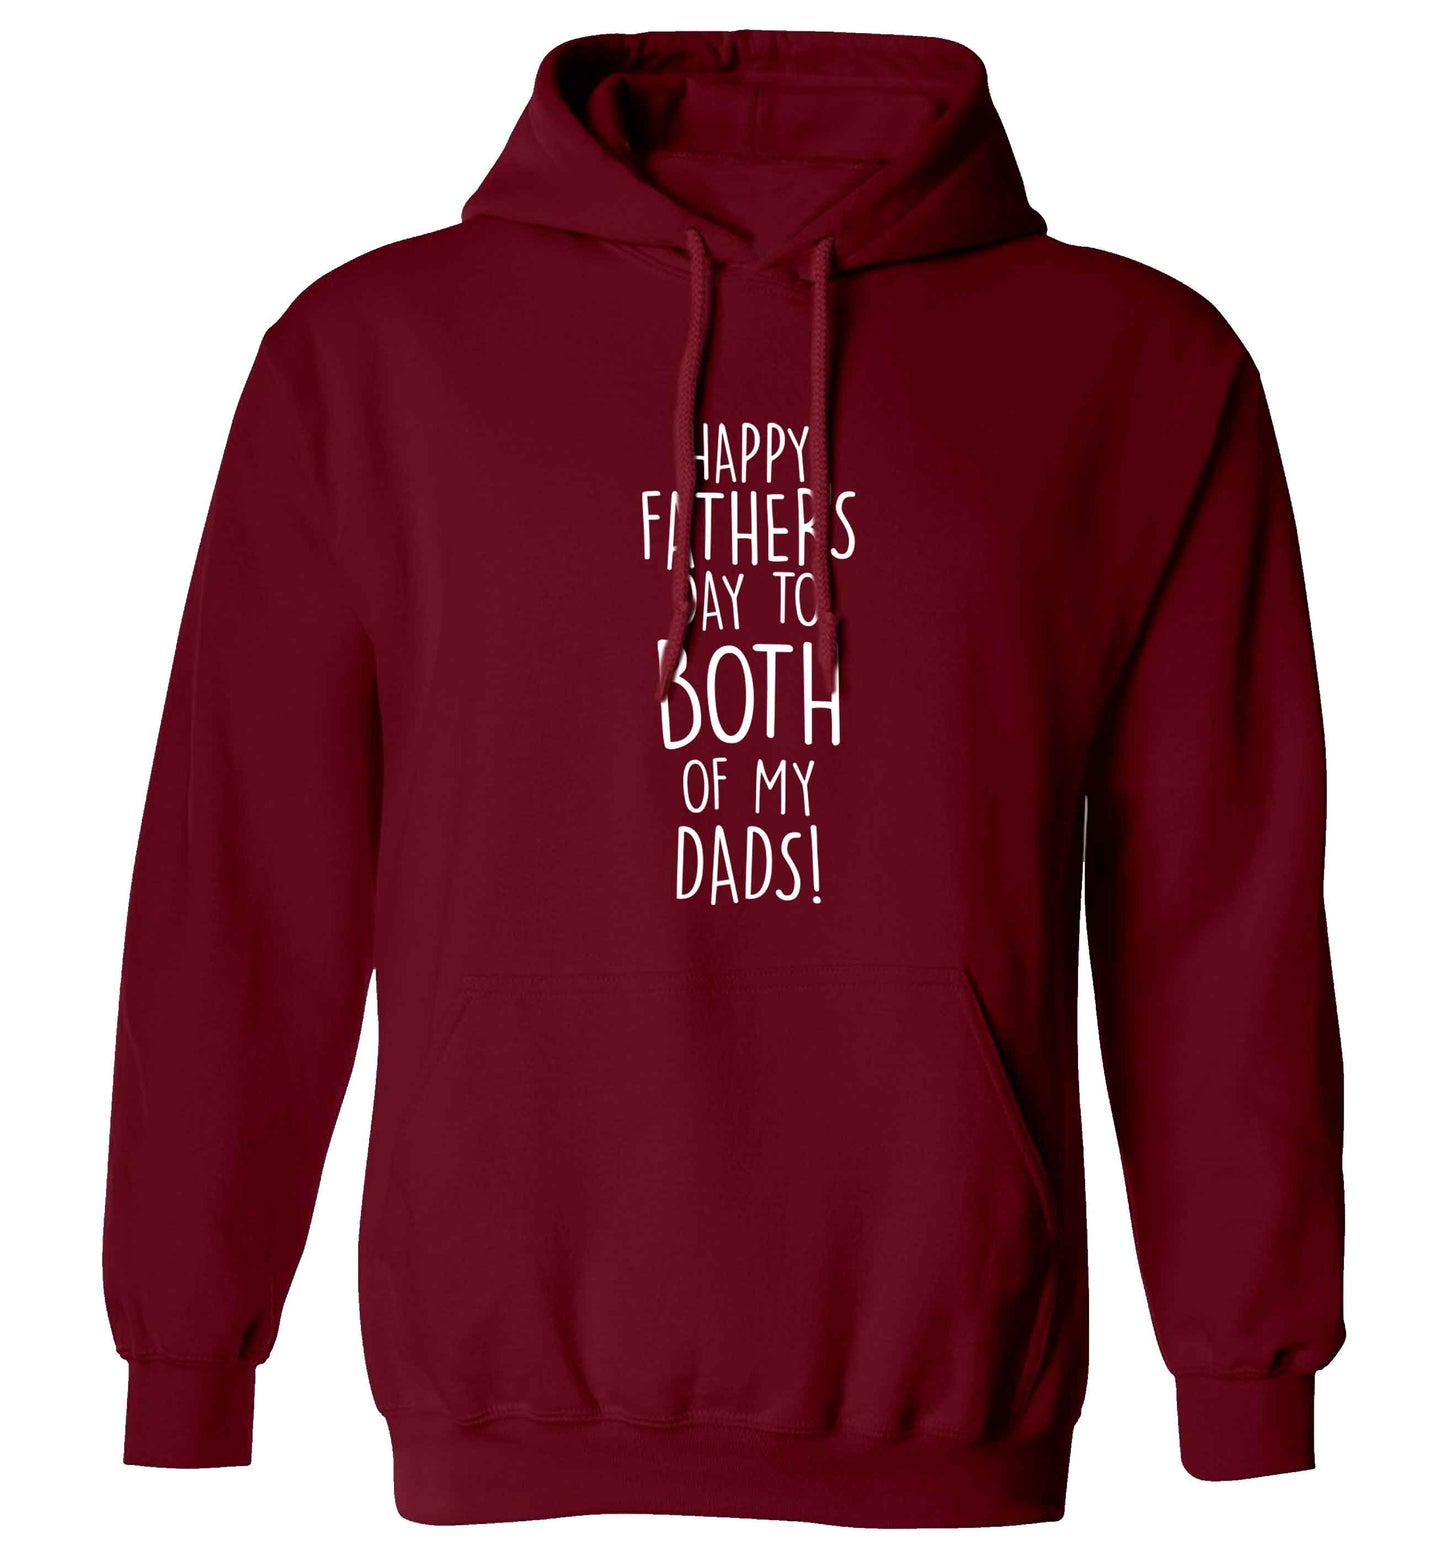 Happy Father's day to both of my dads adults unisex maroon hoodie 2XL